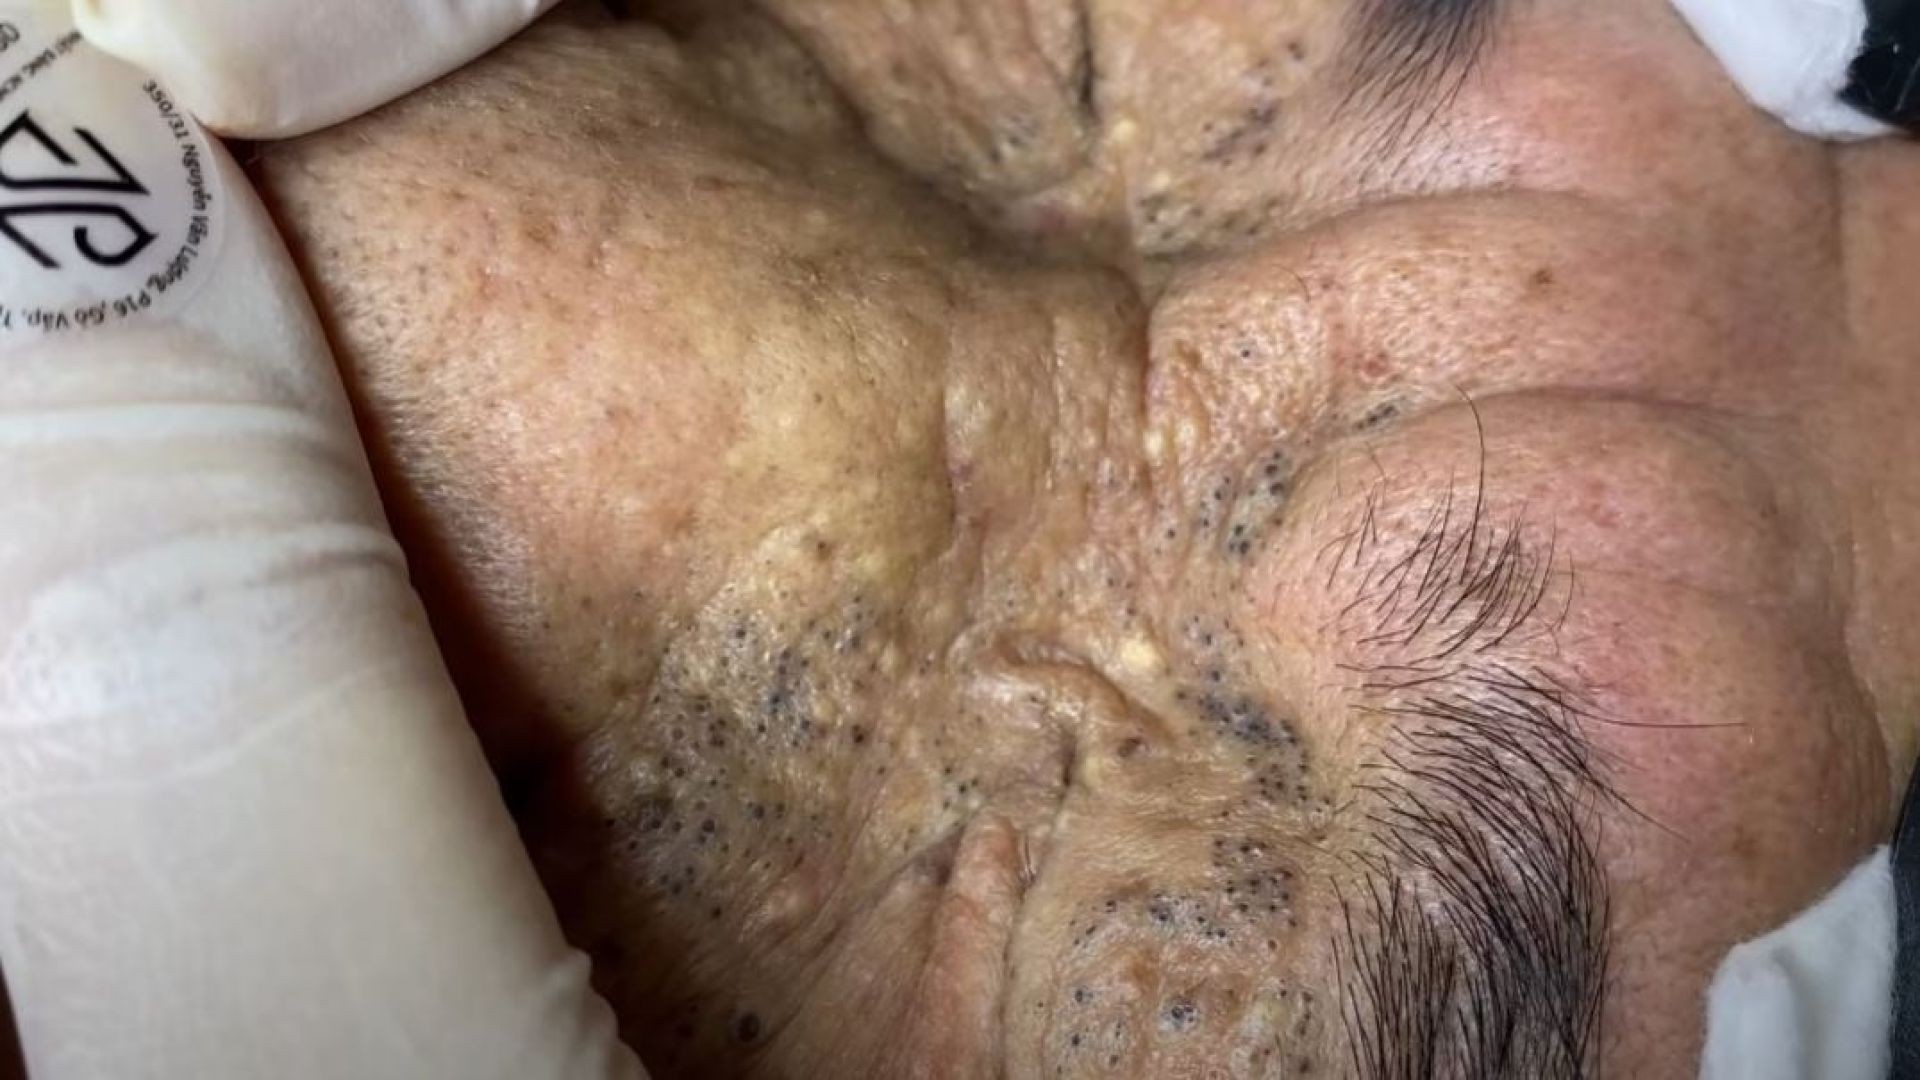 TREATMENT OF BLACKHEADS AND HIDDEN ACNE FOR THE ELDERLY PART 2